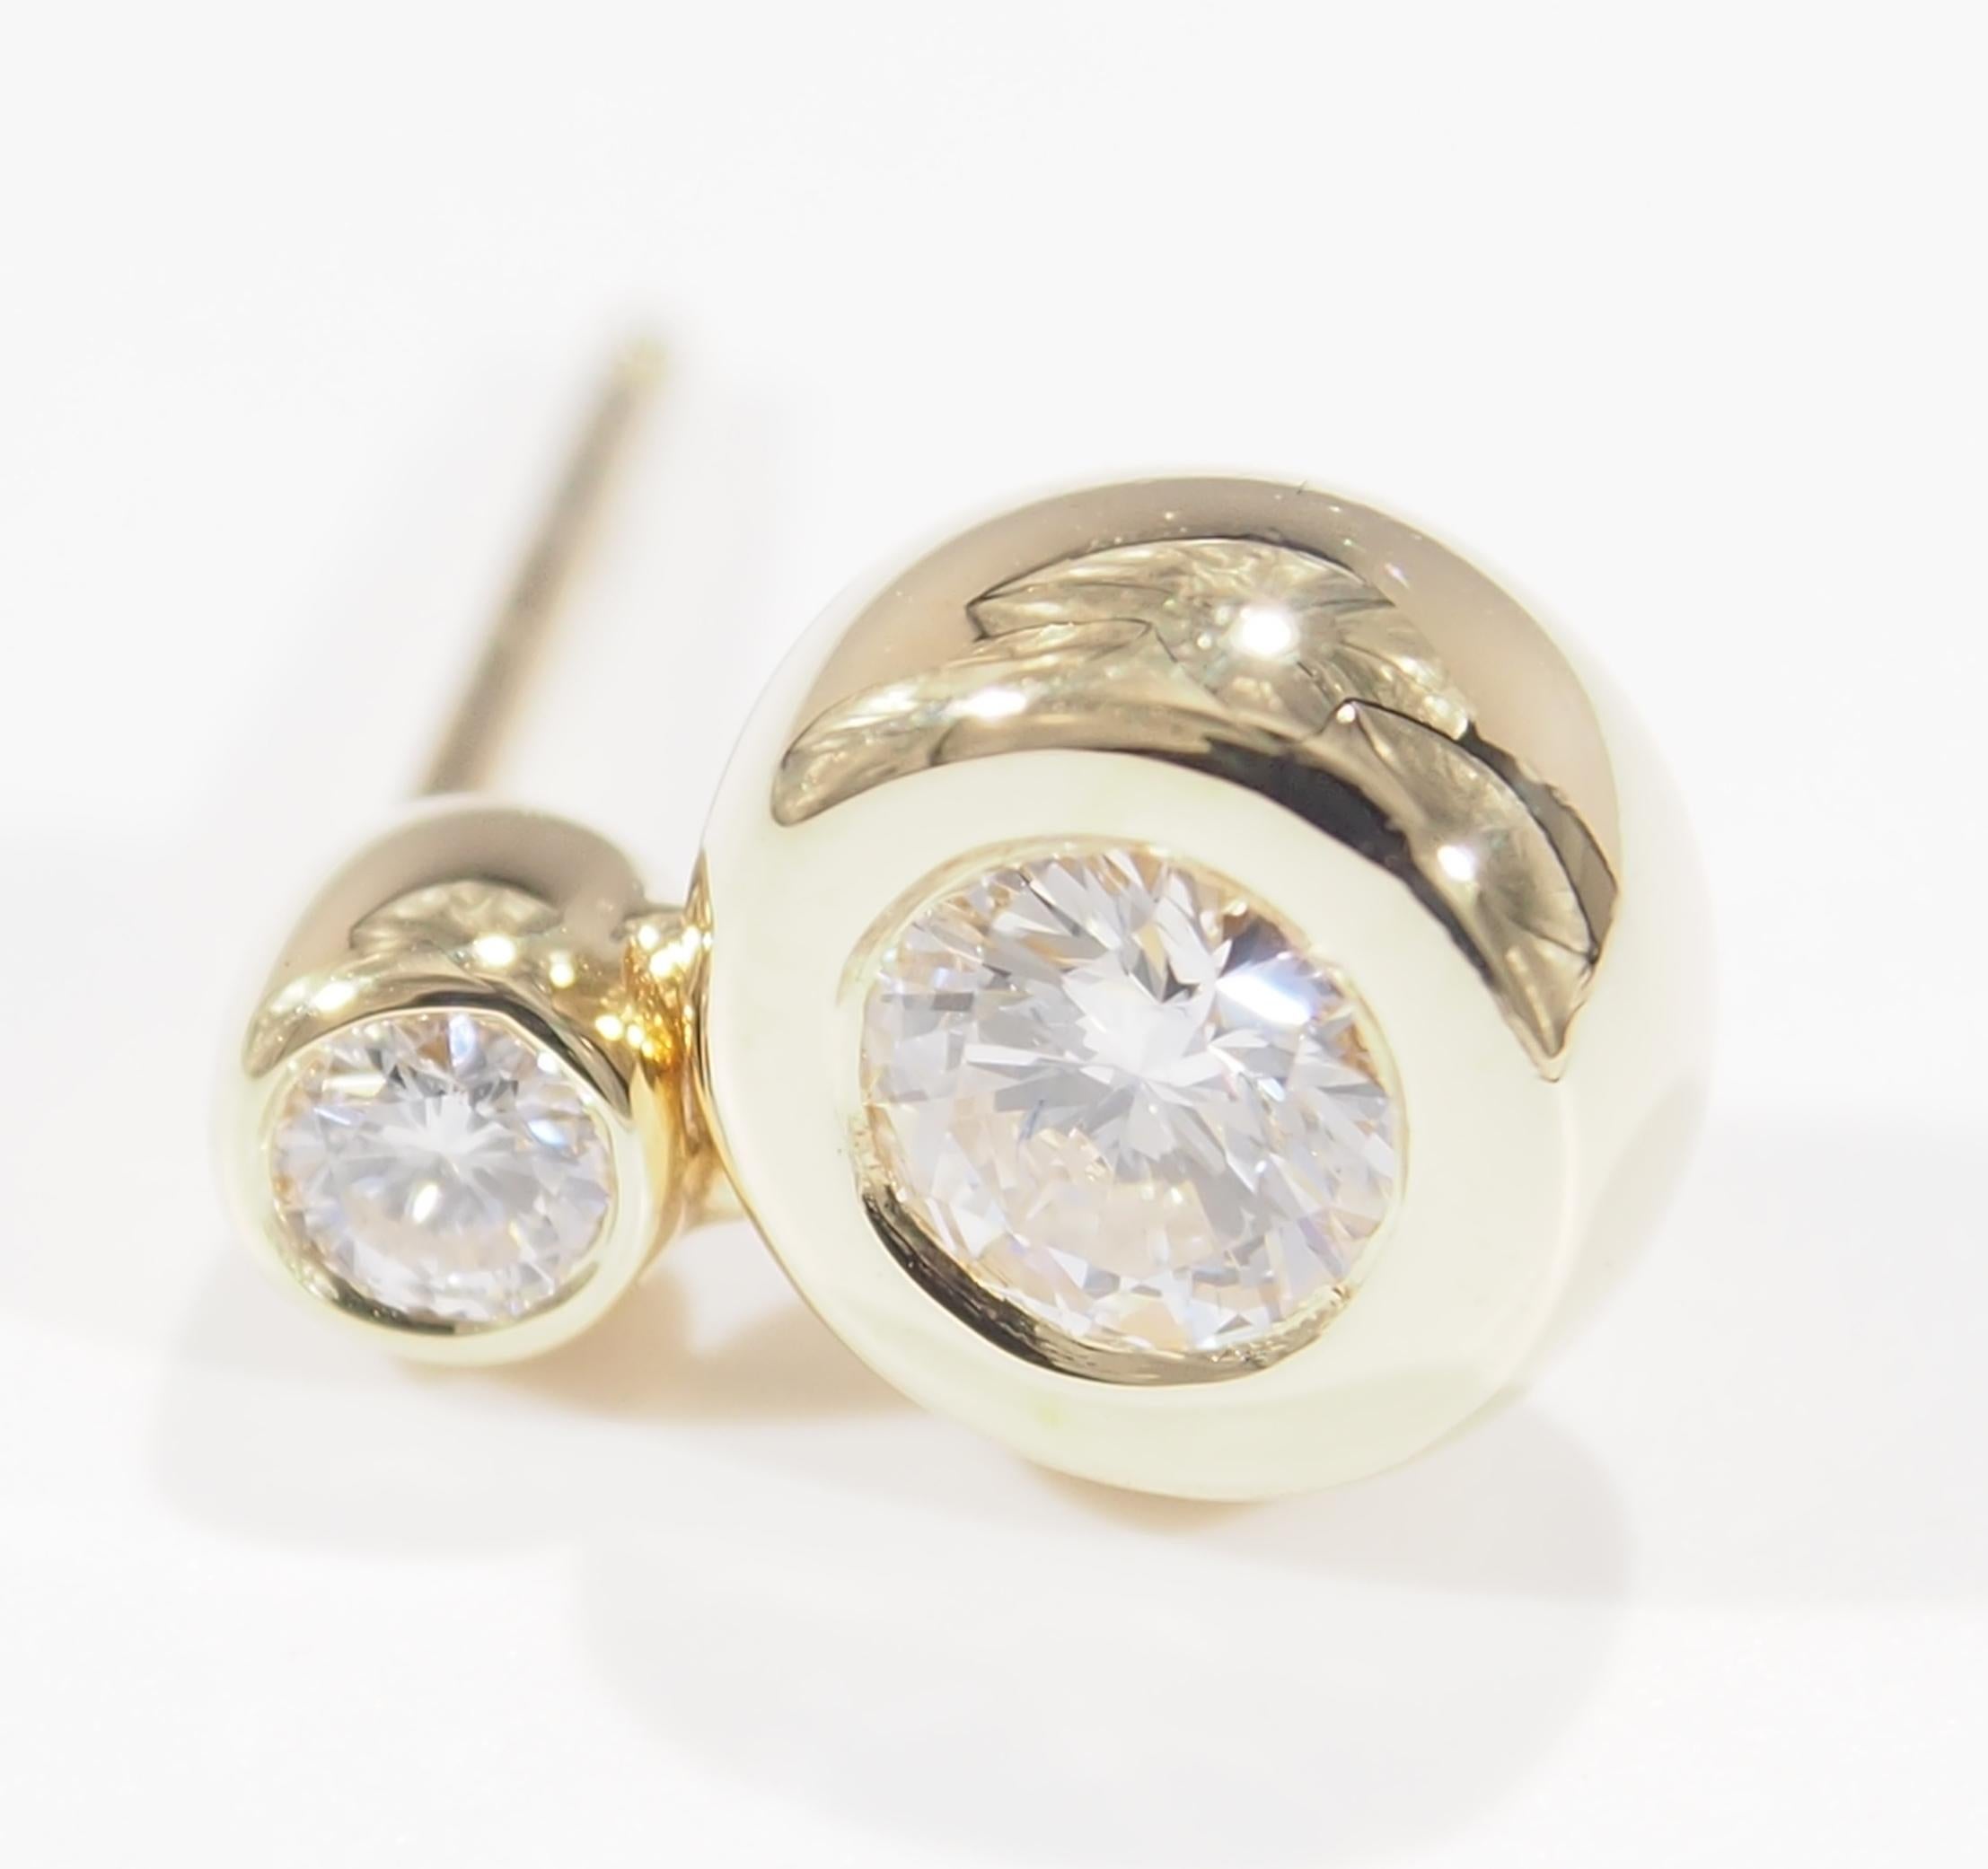 These are a classic pair of 14K Yellow Gold Diamond Drop Earrings. With (4) Round Brilliant Cut Diamonds, approximately 0.64ctw, G-H in Color, VS in Clarity that are bezel set and easily worn any day. They are Hallmarked 